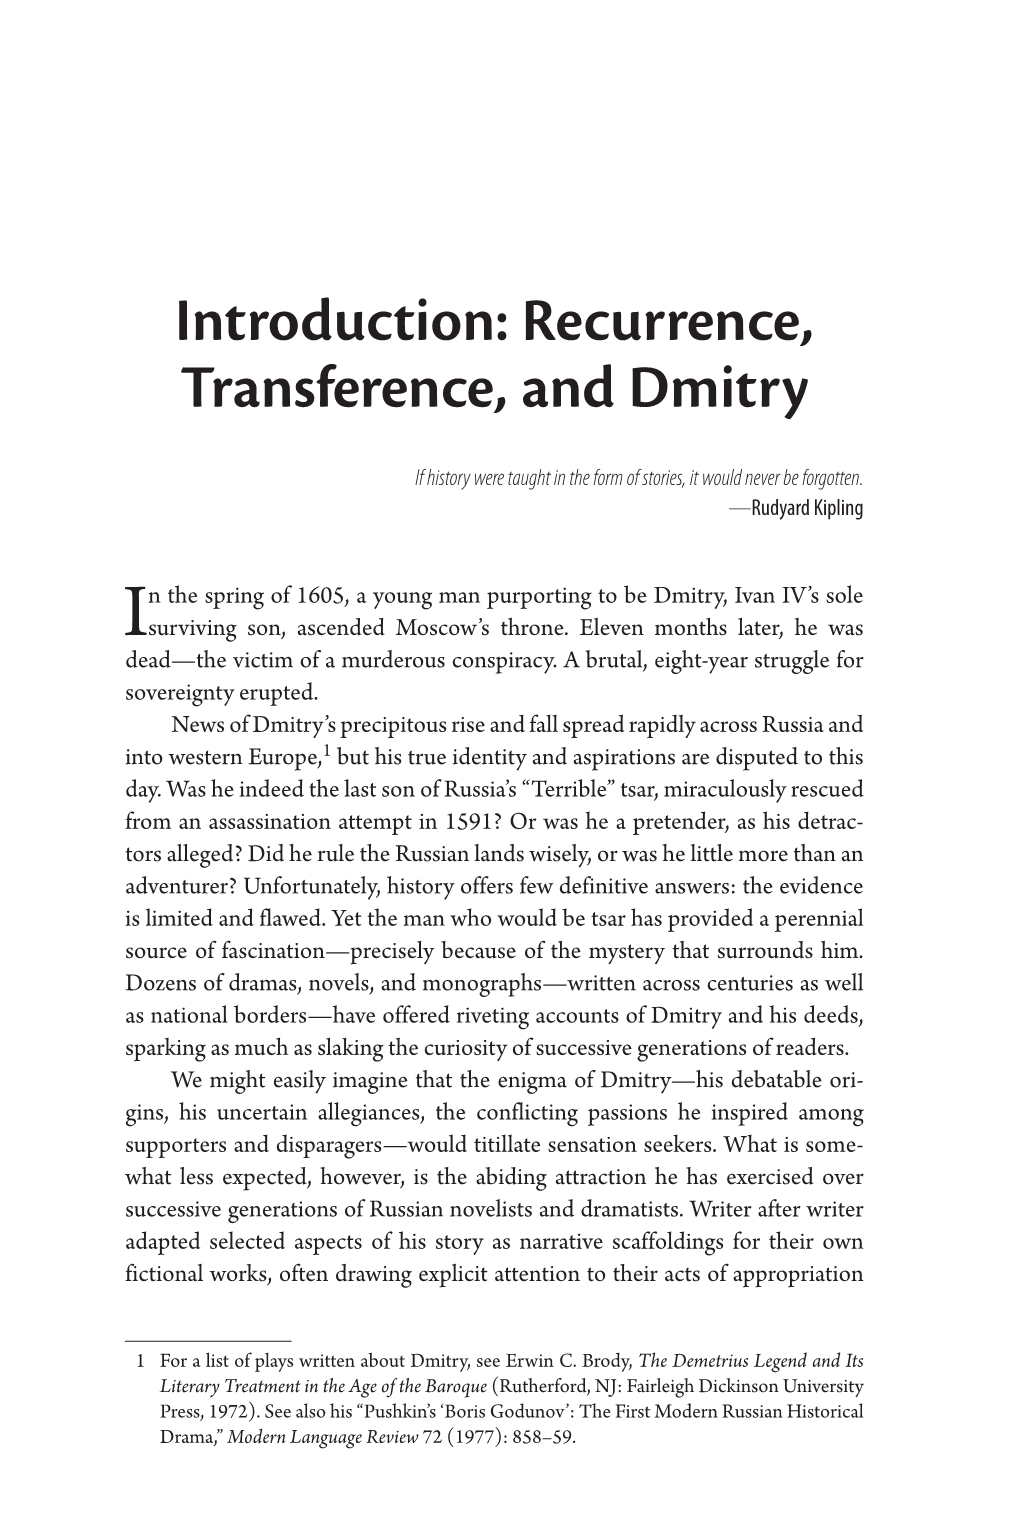 Recurrence, Transference, and Dmitry